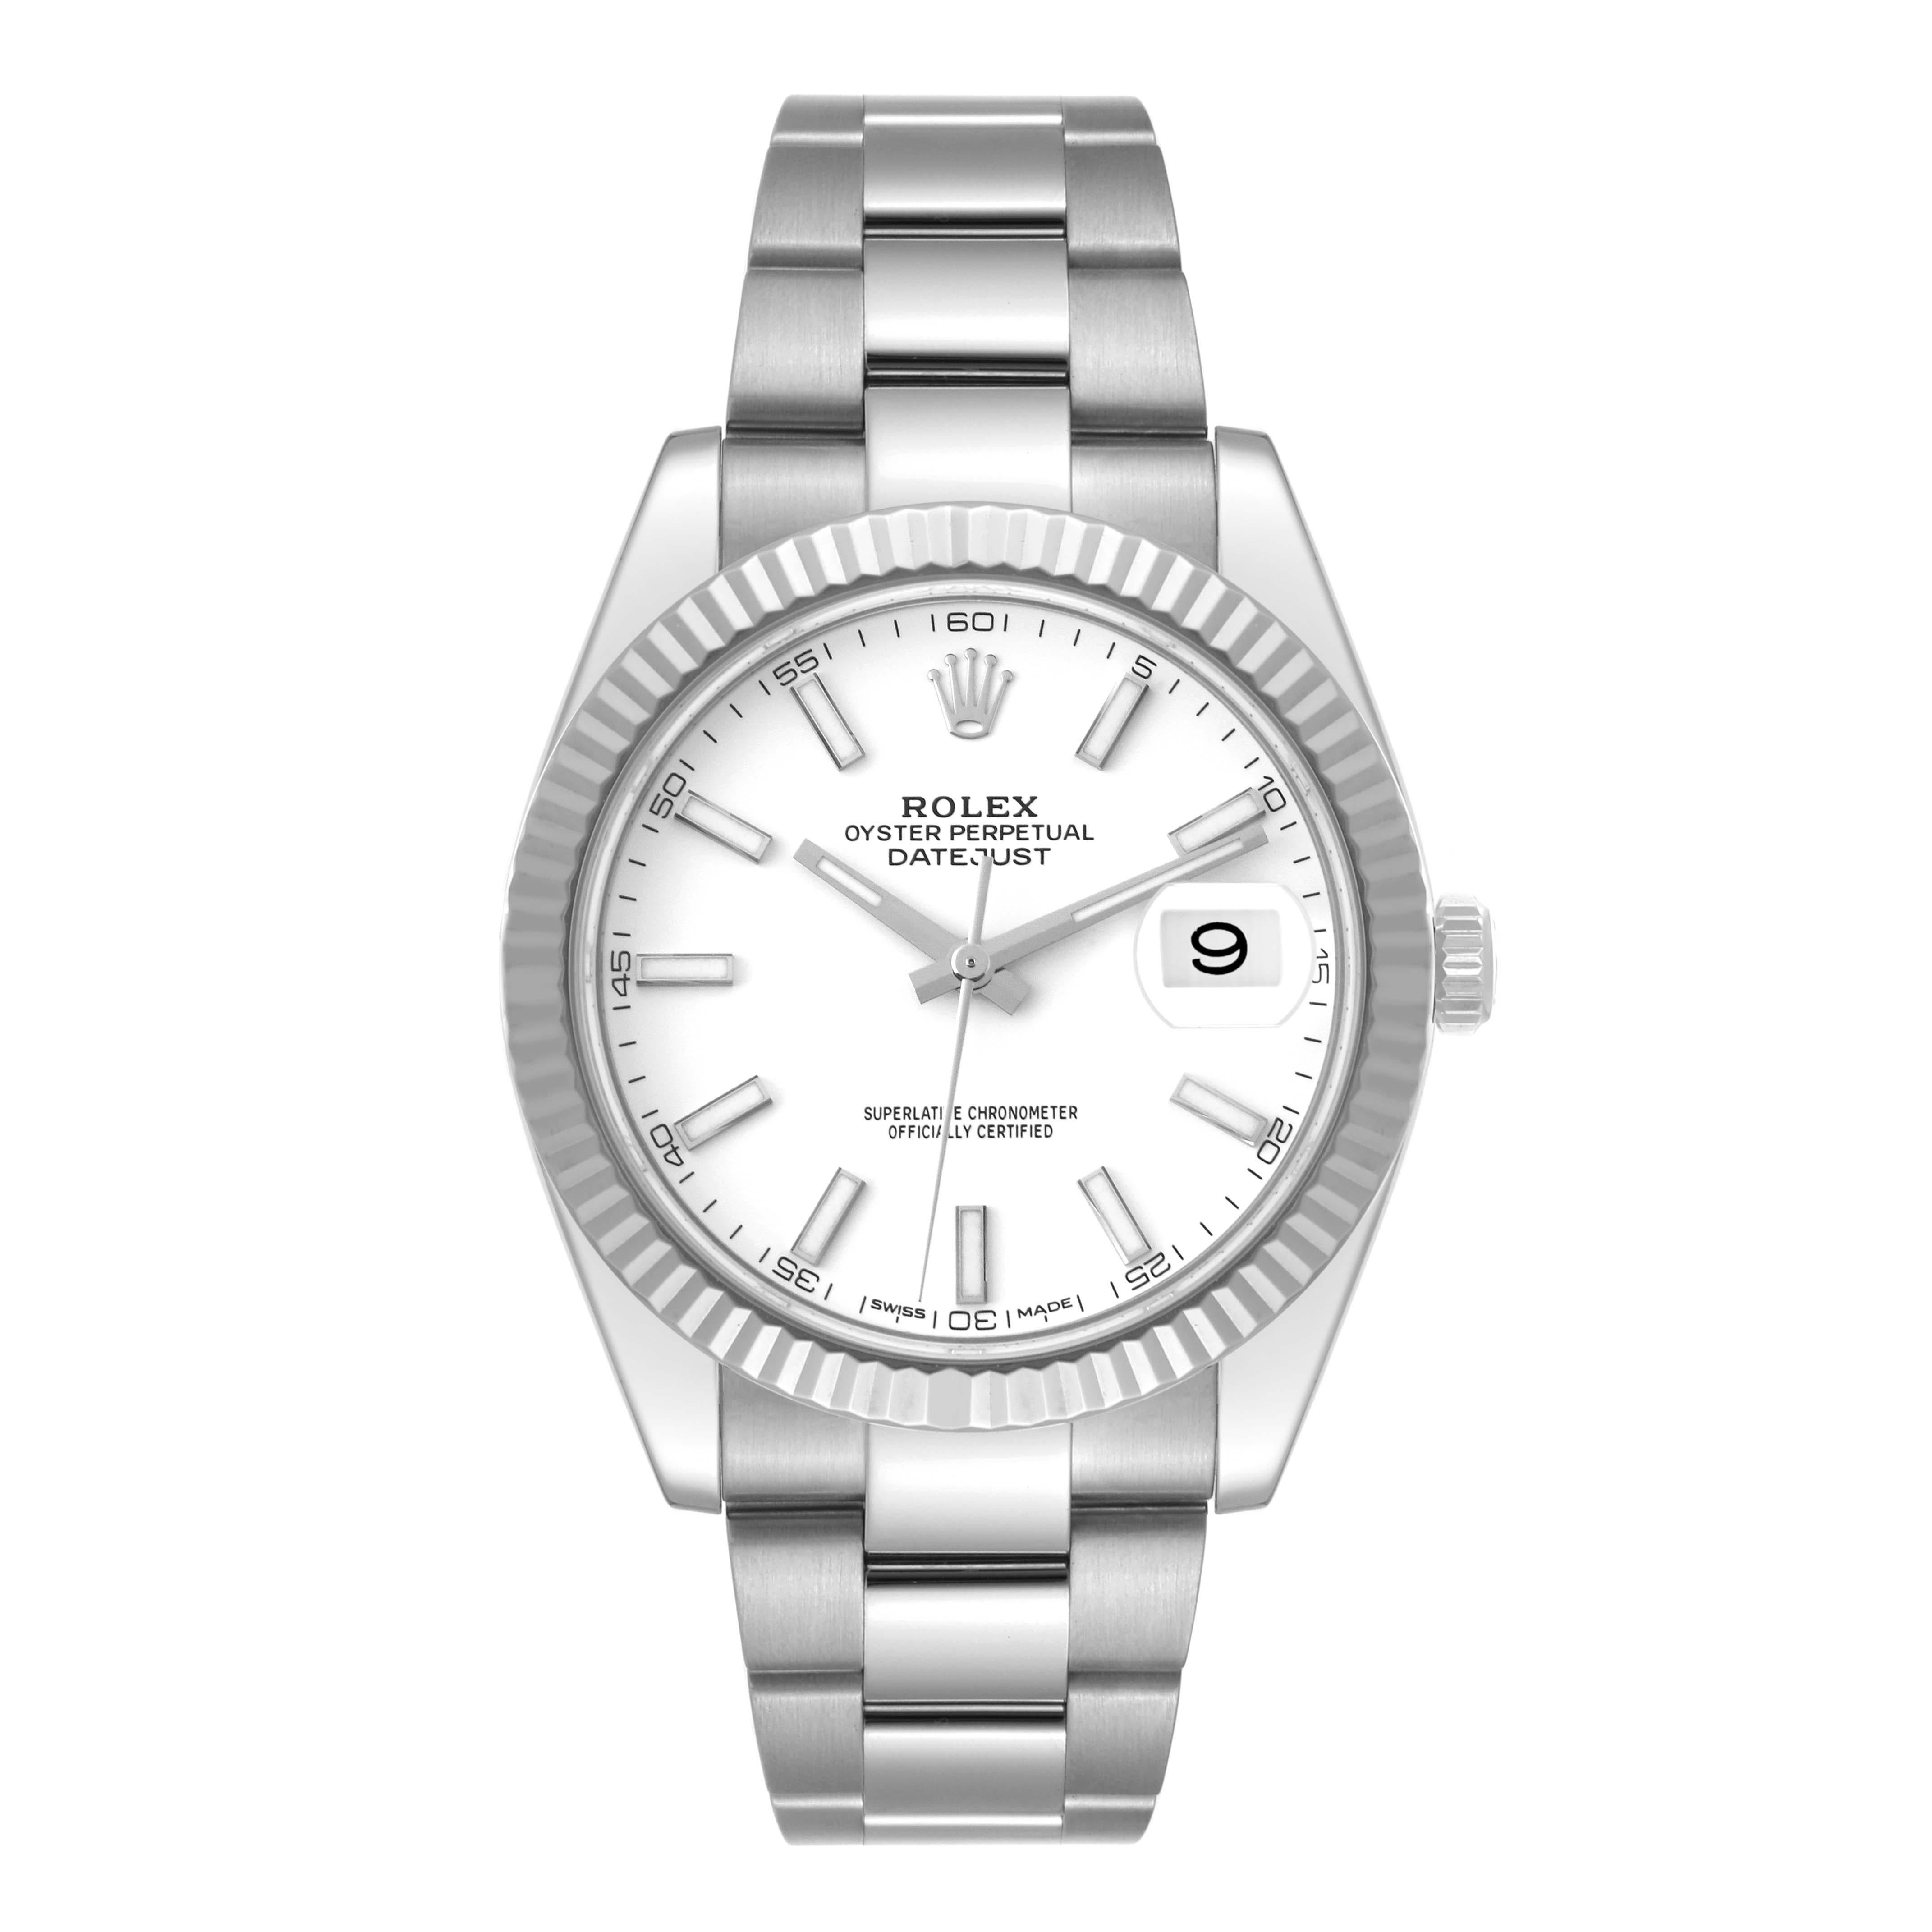 Rolex Datejust 41 Steel White Dial Oyster Bracelet Mens Watch 126334 Box Card. Officially certified chronometer automatic self-winding movement. Stainless steel case 41 mm in diameter. Rolex logo on the crown. 18K white gold fluted bezel. Scratch